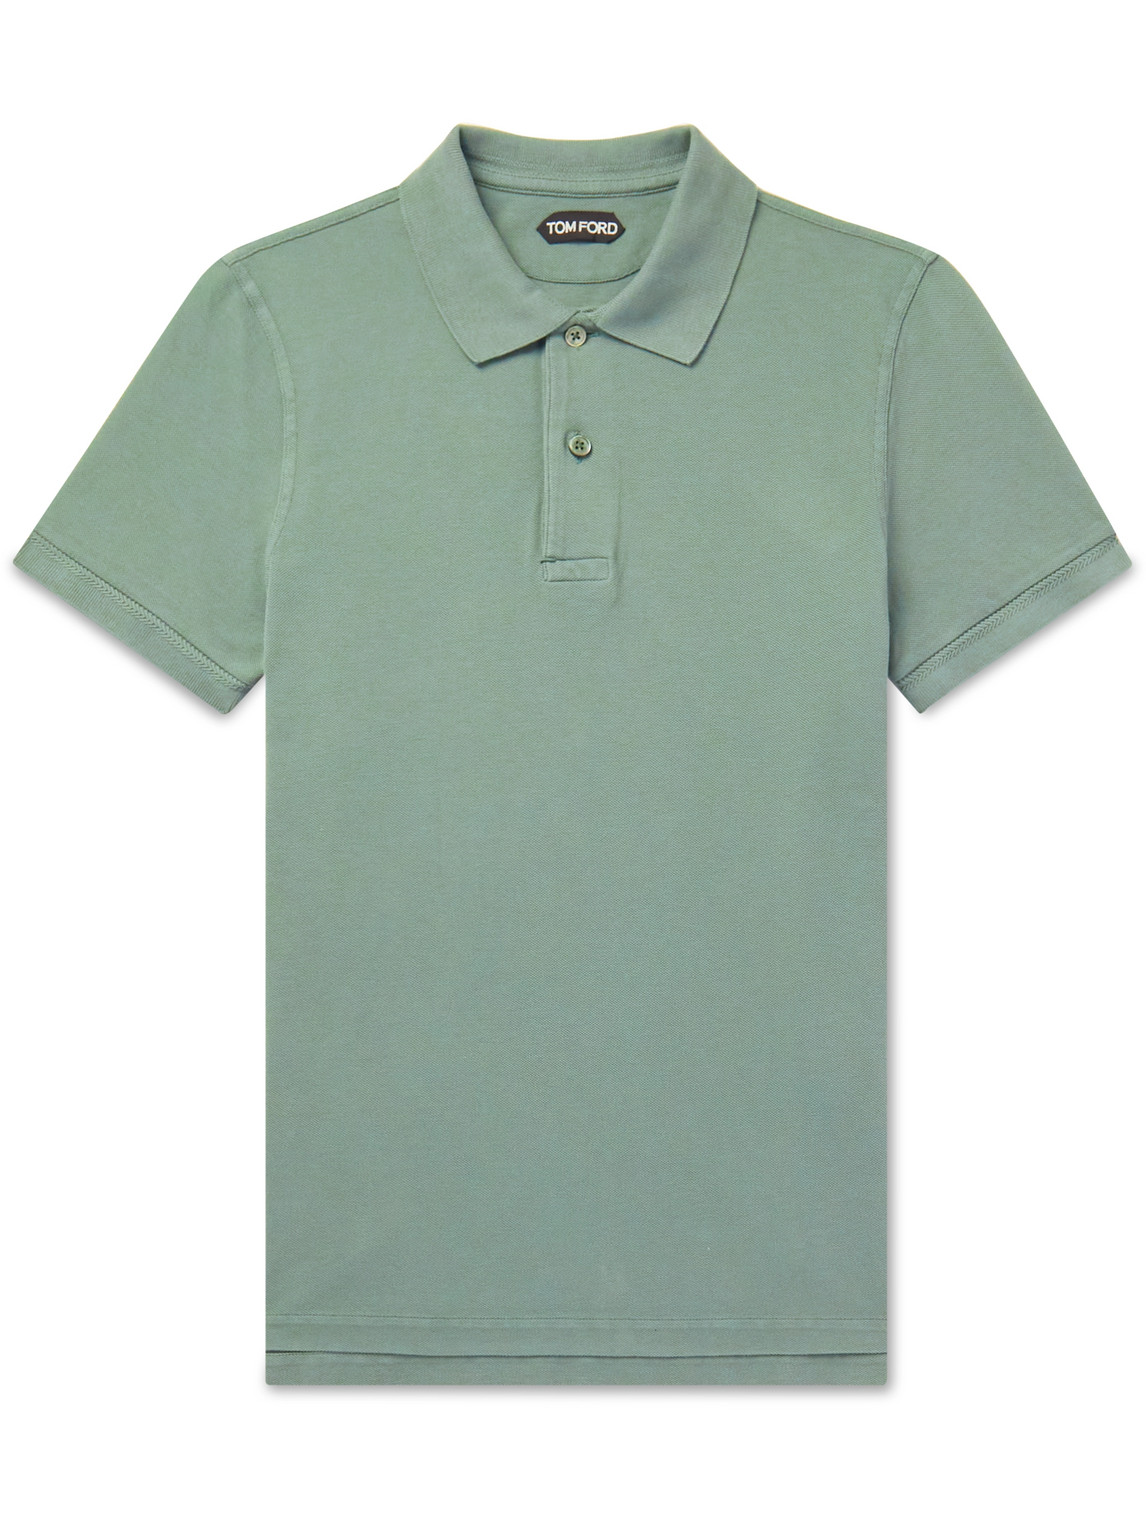 Tom Ford Garment-dyed Cotton-piqué Polo Shirt In Sage